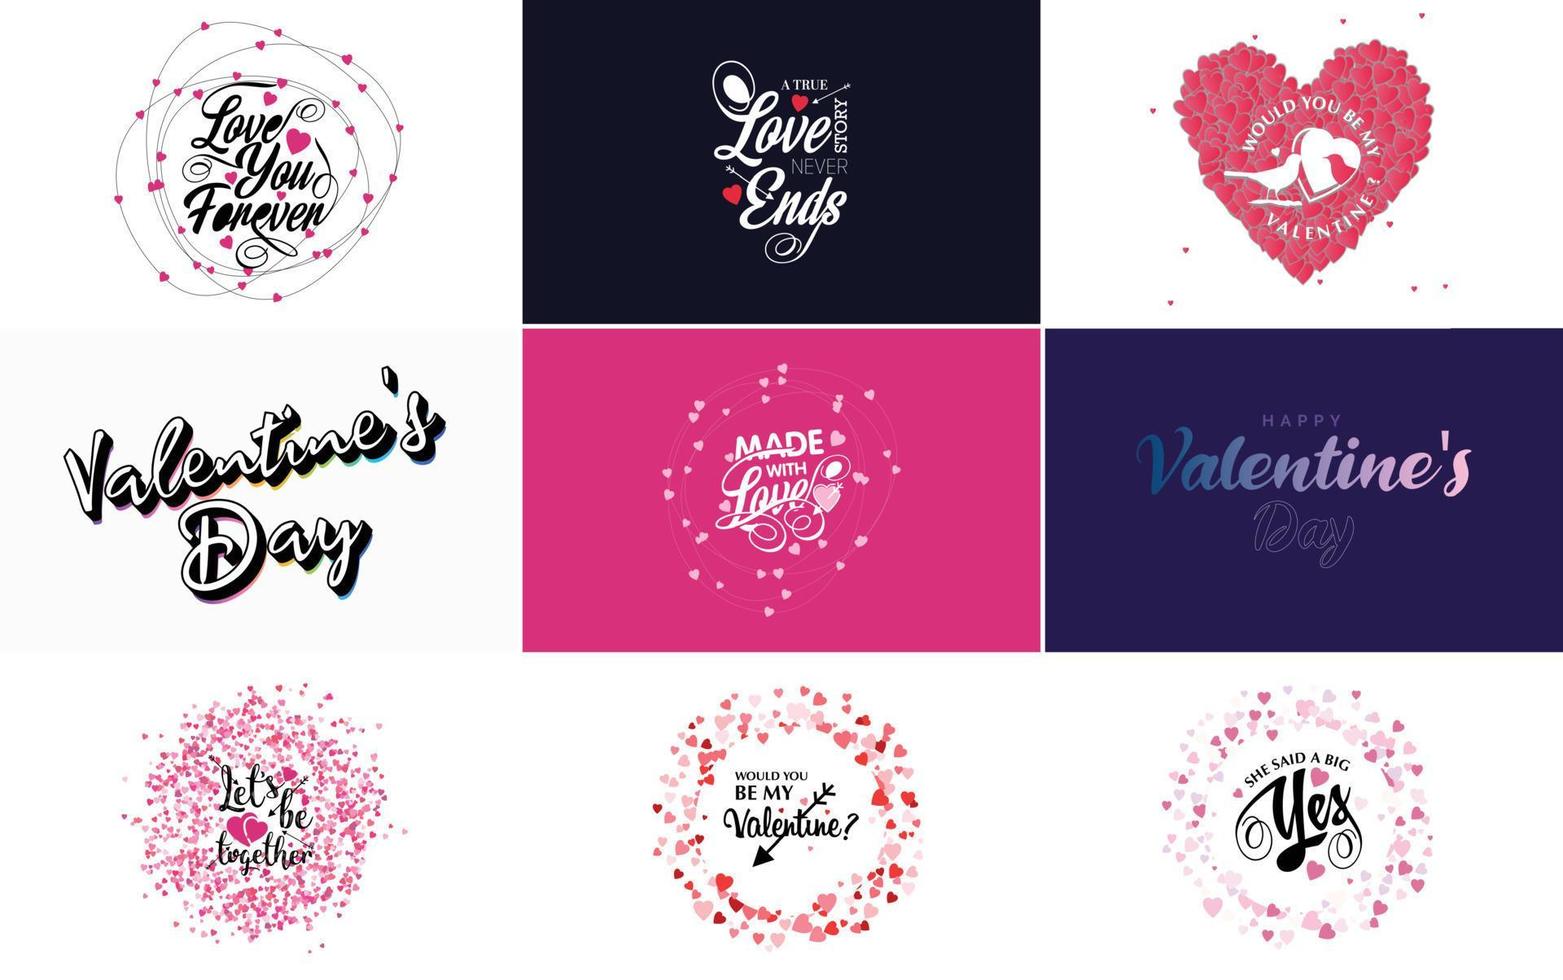 Love and Valentine's word art designs with heart shapes vector